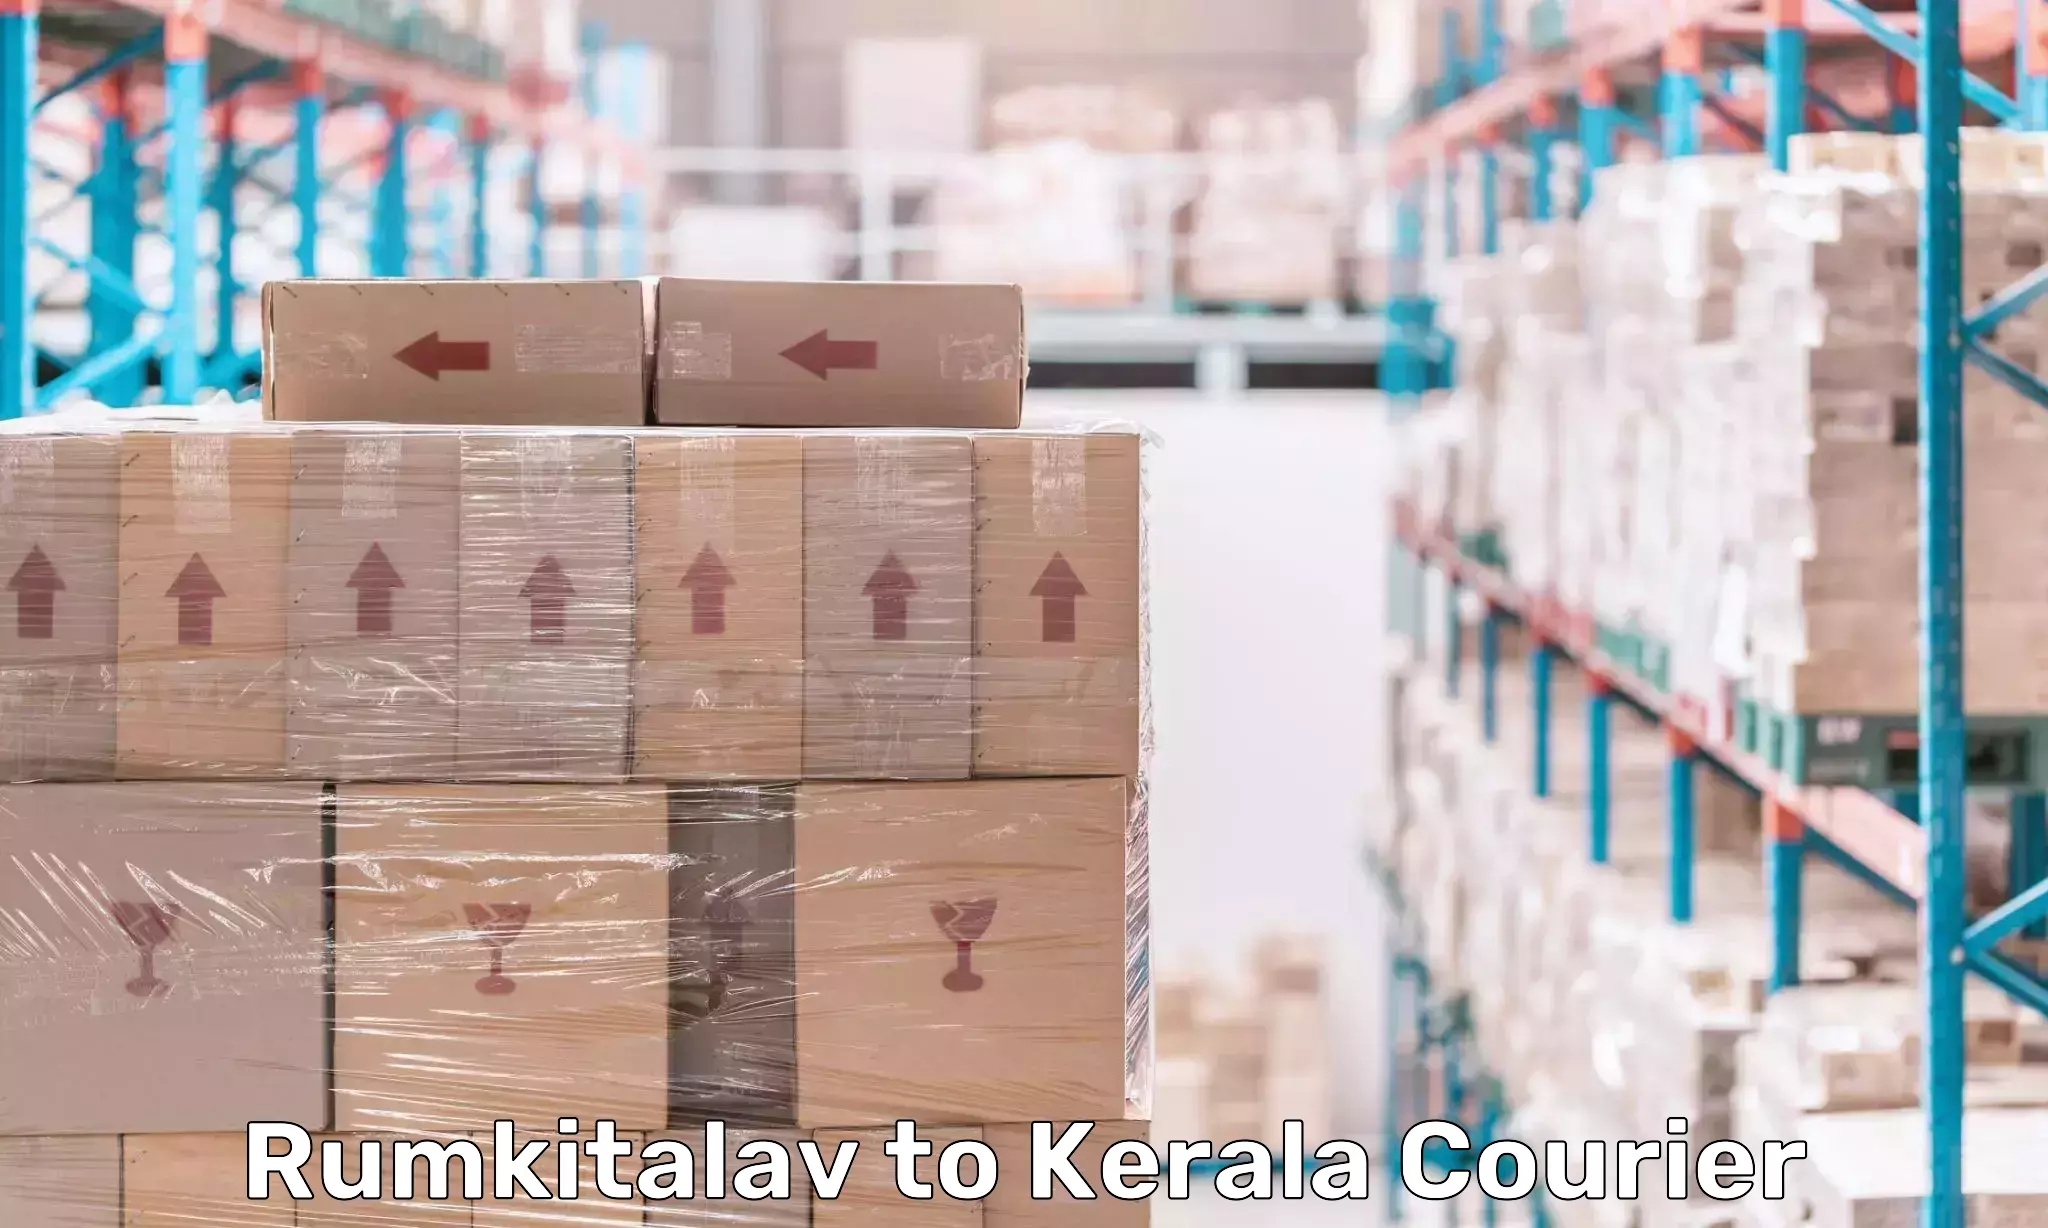 Courier app Rumkitalav to Thrissur